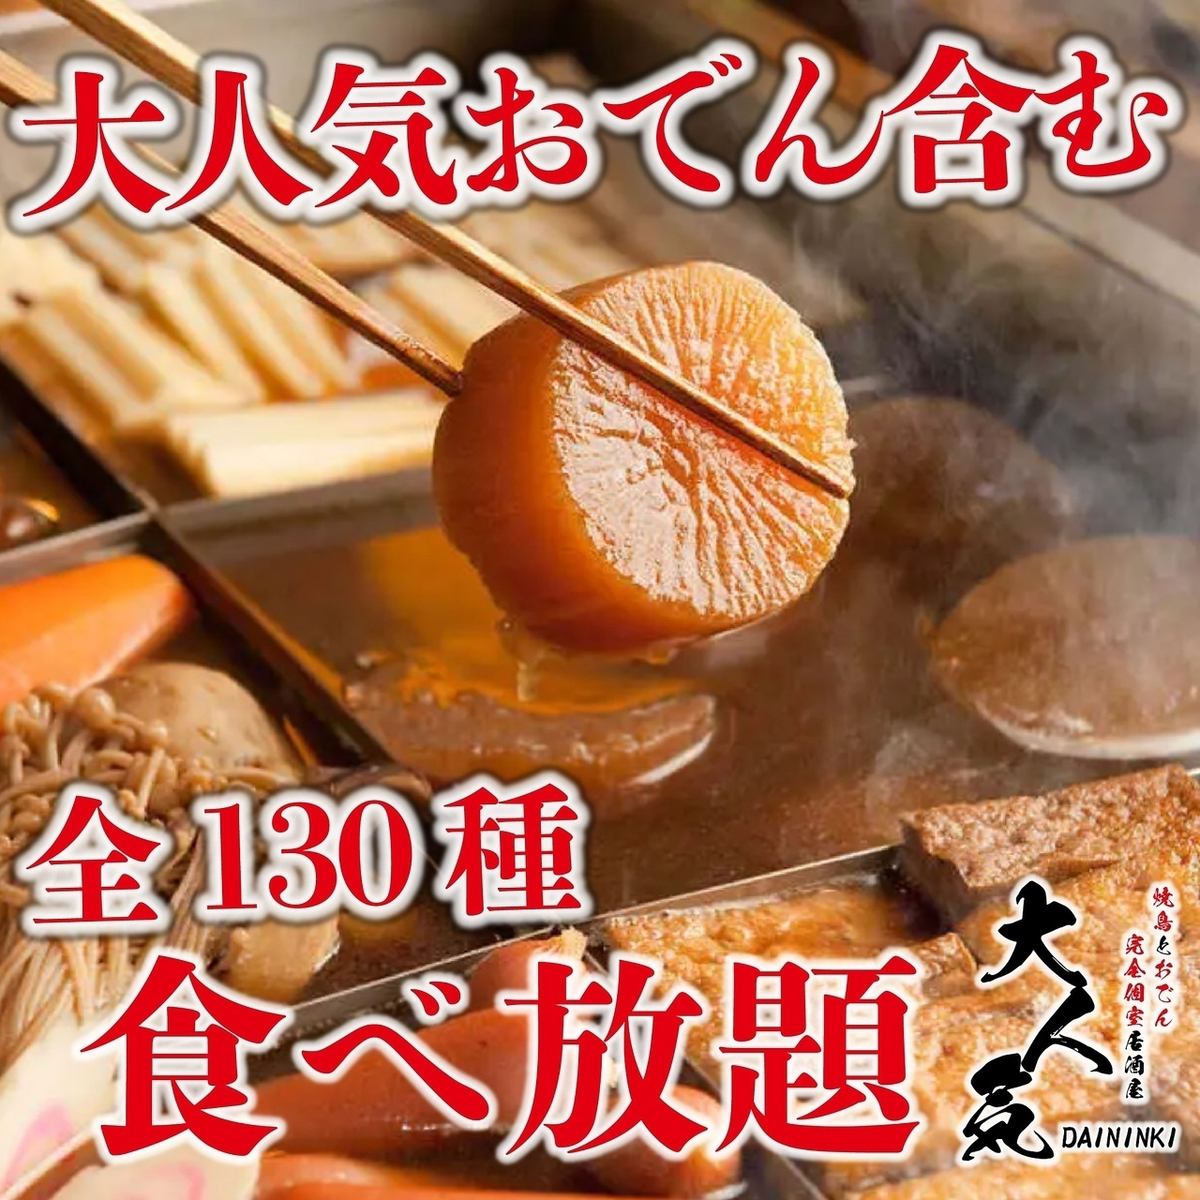 "All-you-can-eat course of 20 dishes including motsu nabe" 3 hours all-you-can-drink 3,280 yen